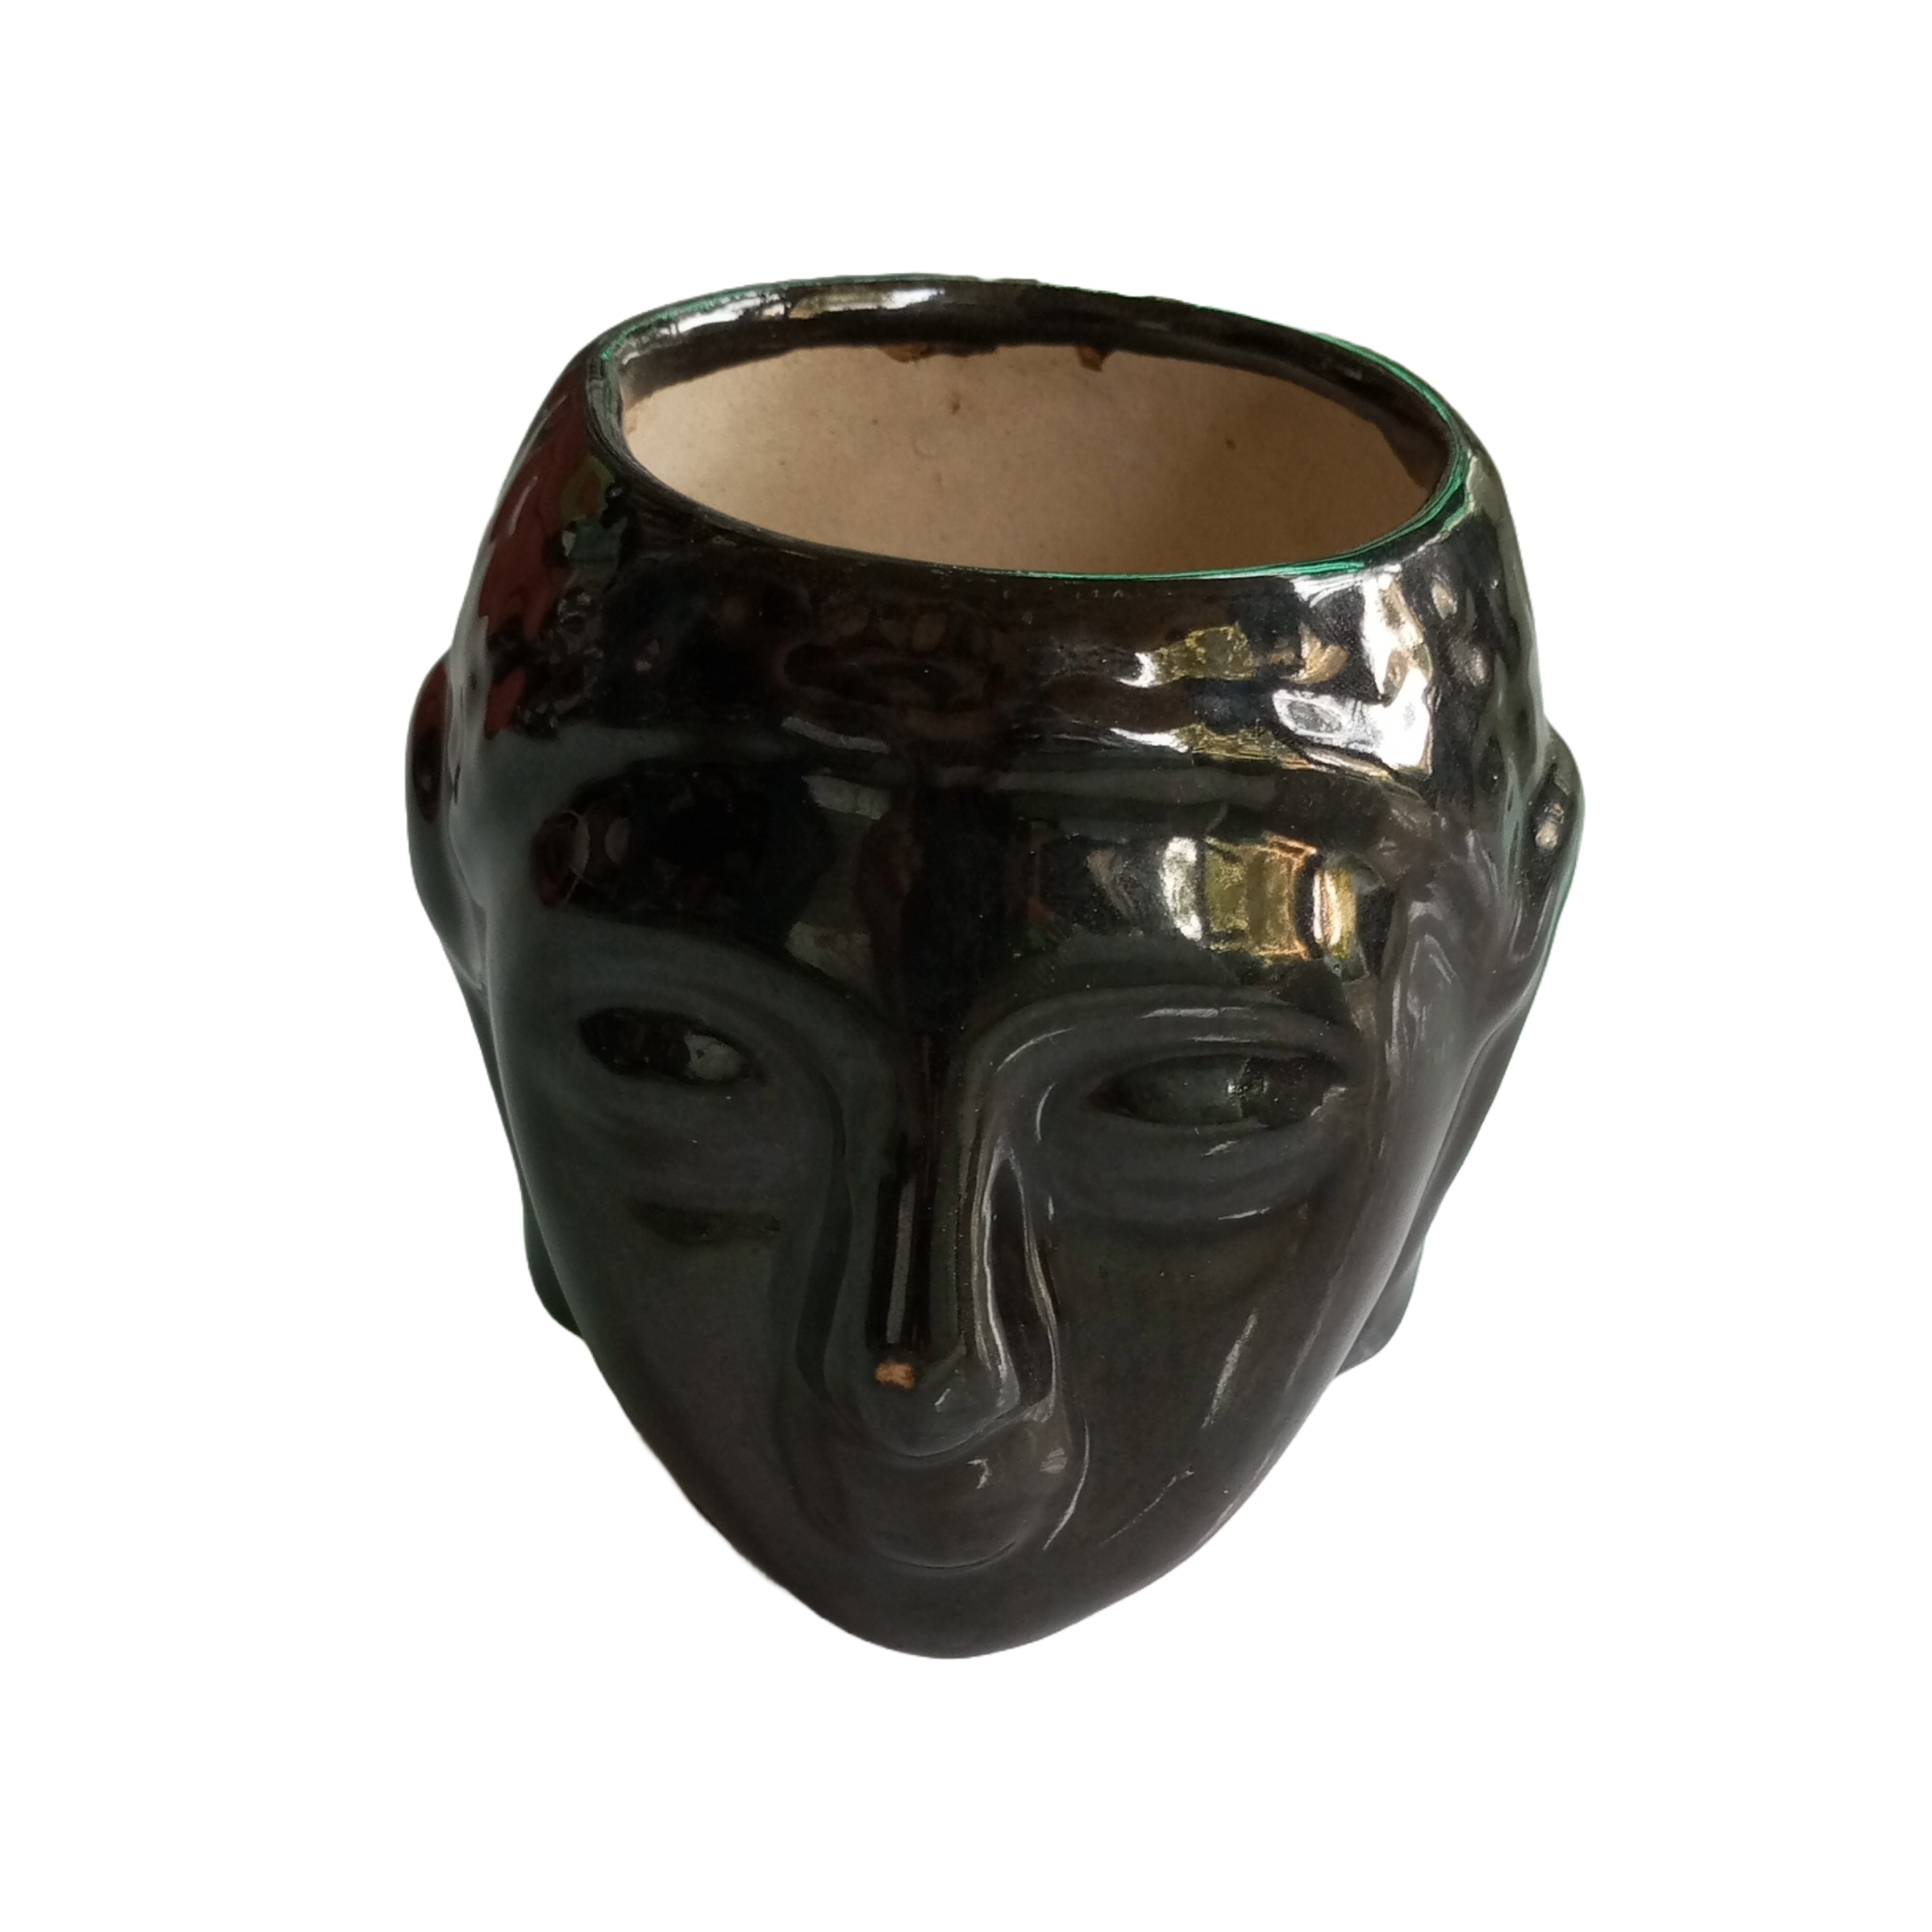 Aesthetic charm in a Buddha-themed Ceramic Pot, Elevate decor with the serenity of Buddha